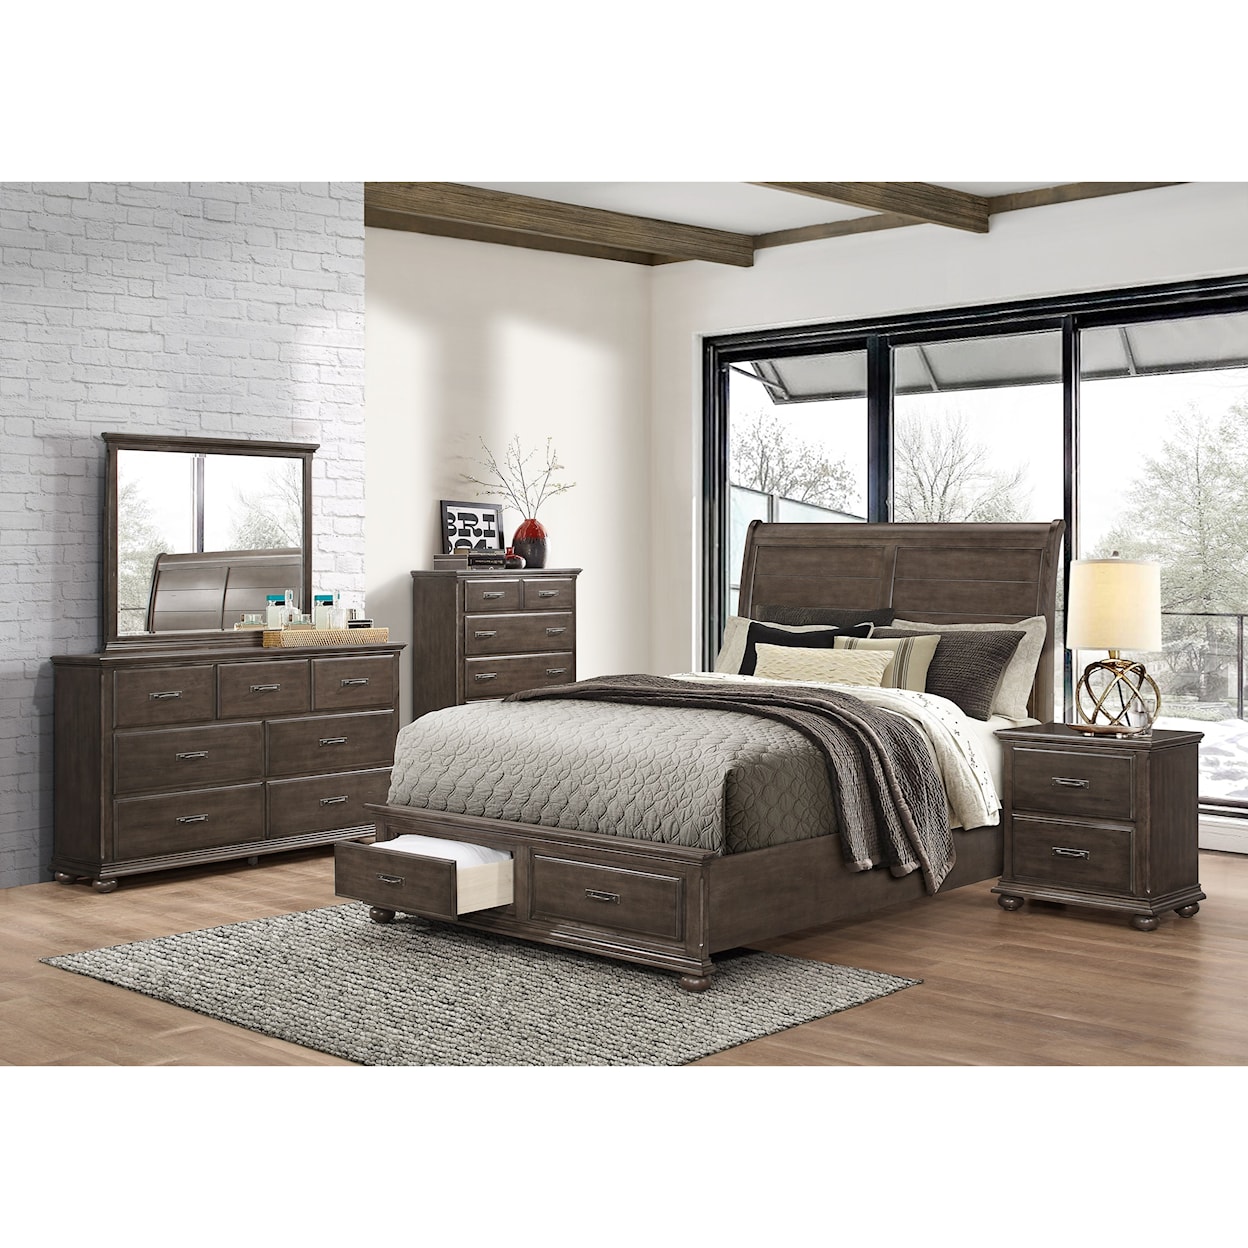 United Furniture Industries 1026 King Sleigh Bed